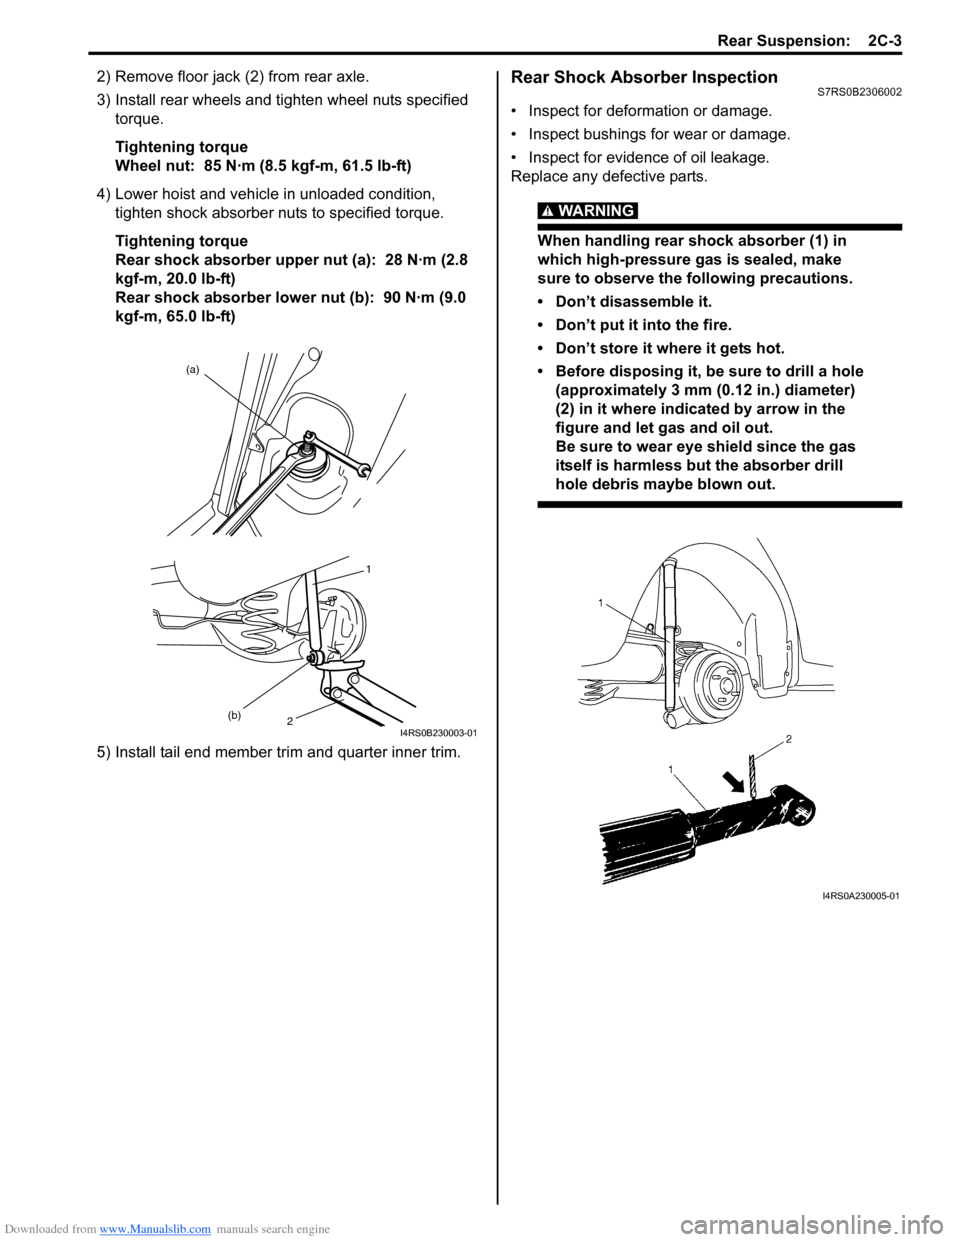 SUZUKI SWIFT 2007 2.G Service Repair Manual Downloaded from www.Manualslib.com manuals search engine Rear Suspension:  2C-3
2) Remove floor jack (2) from rear axle.
3) Install rear wheels and tighten wheel nuts specified torque.
Tightening torq